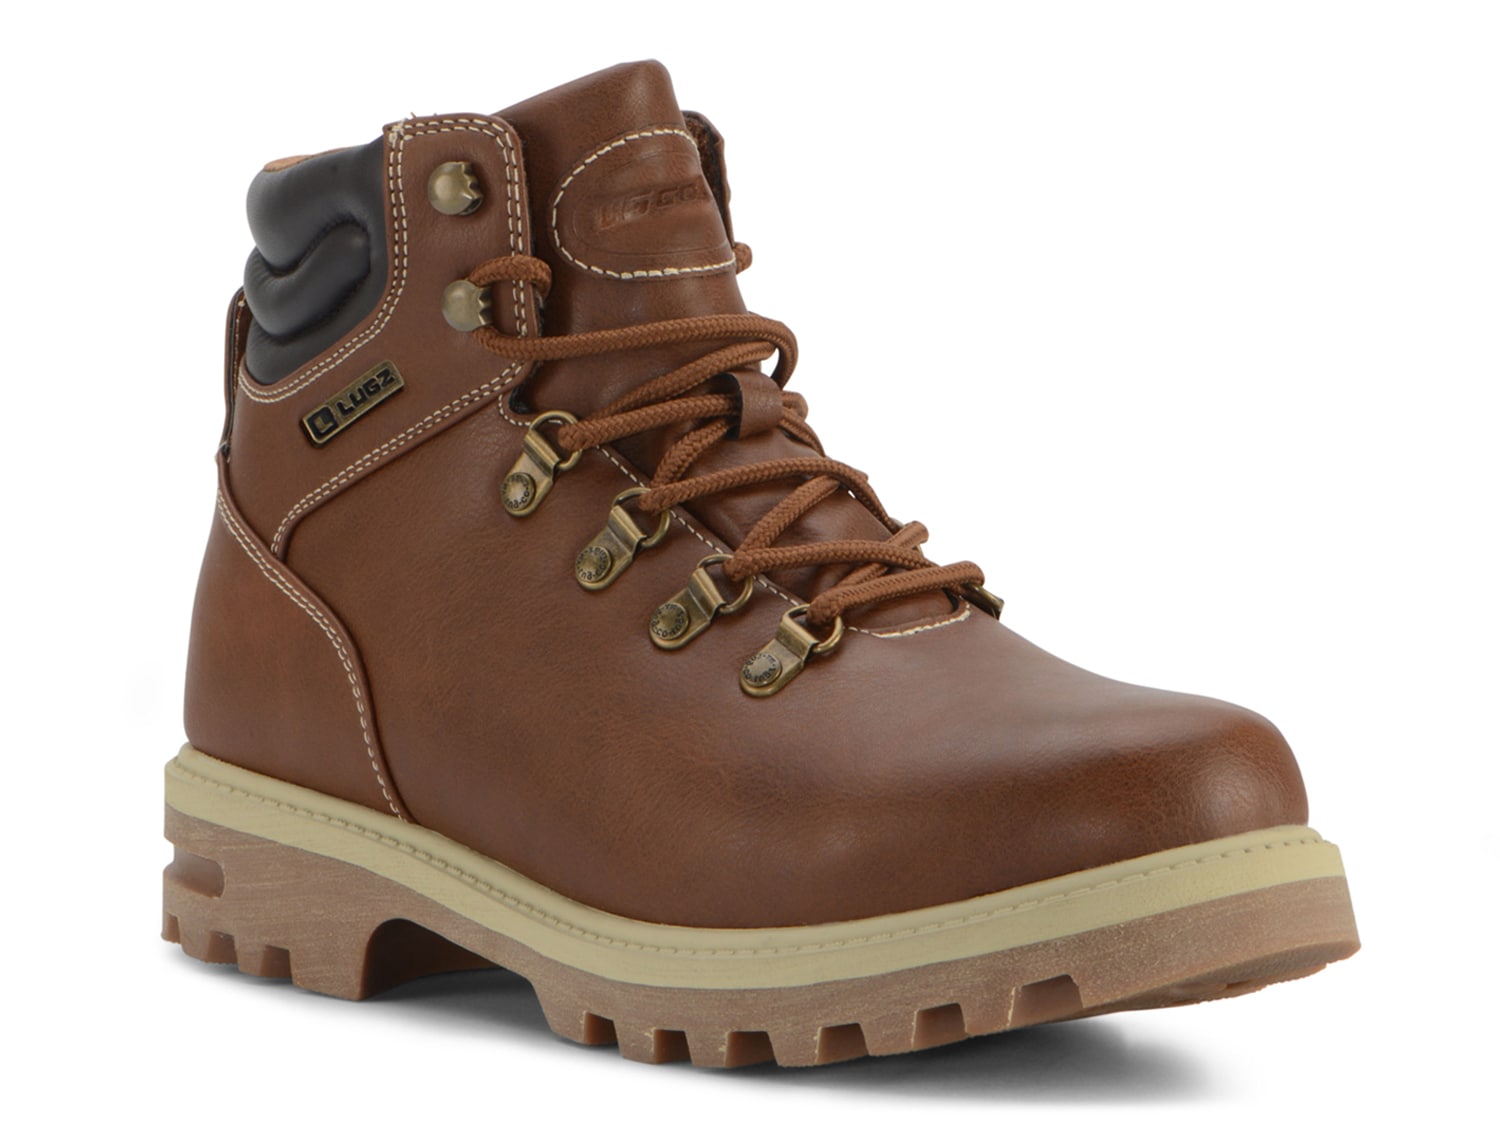 Lugz Boots, Sneakers \u0026 Shoes | Work 